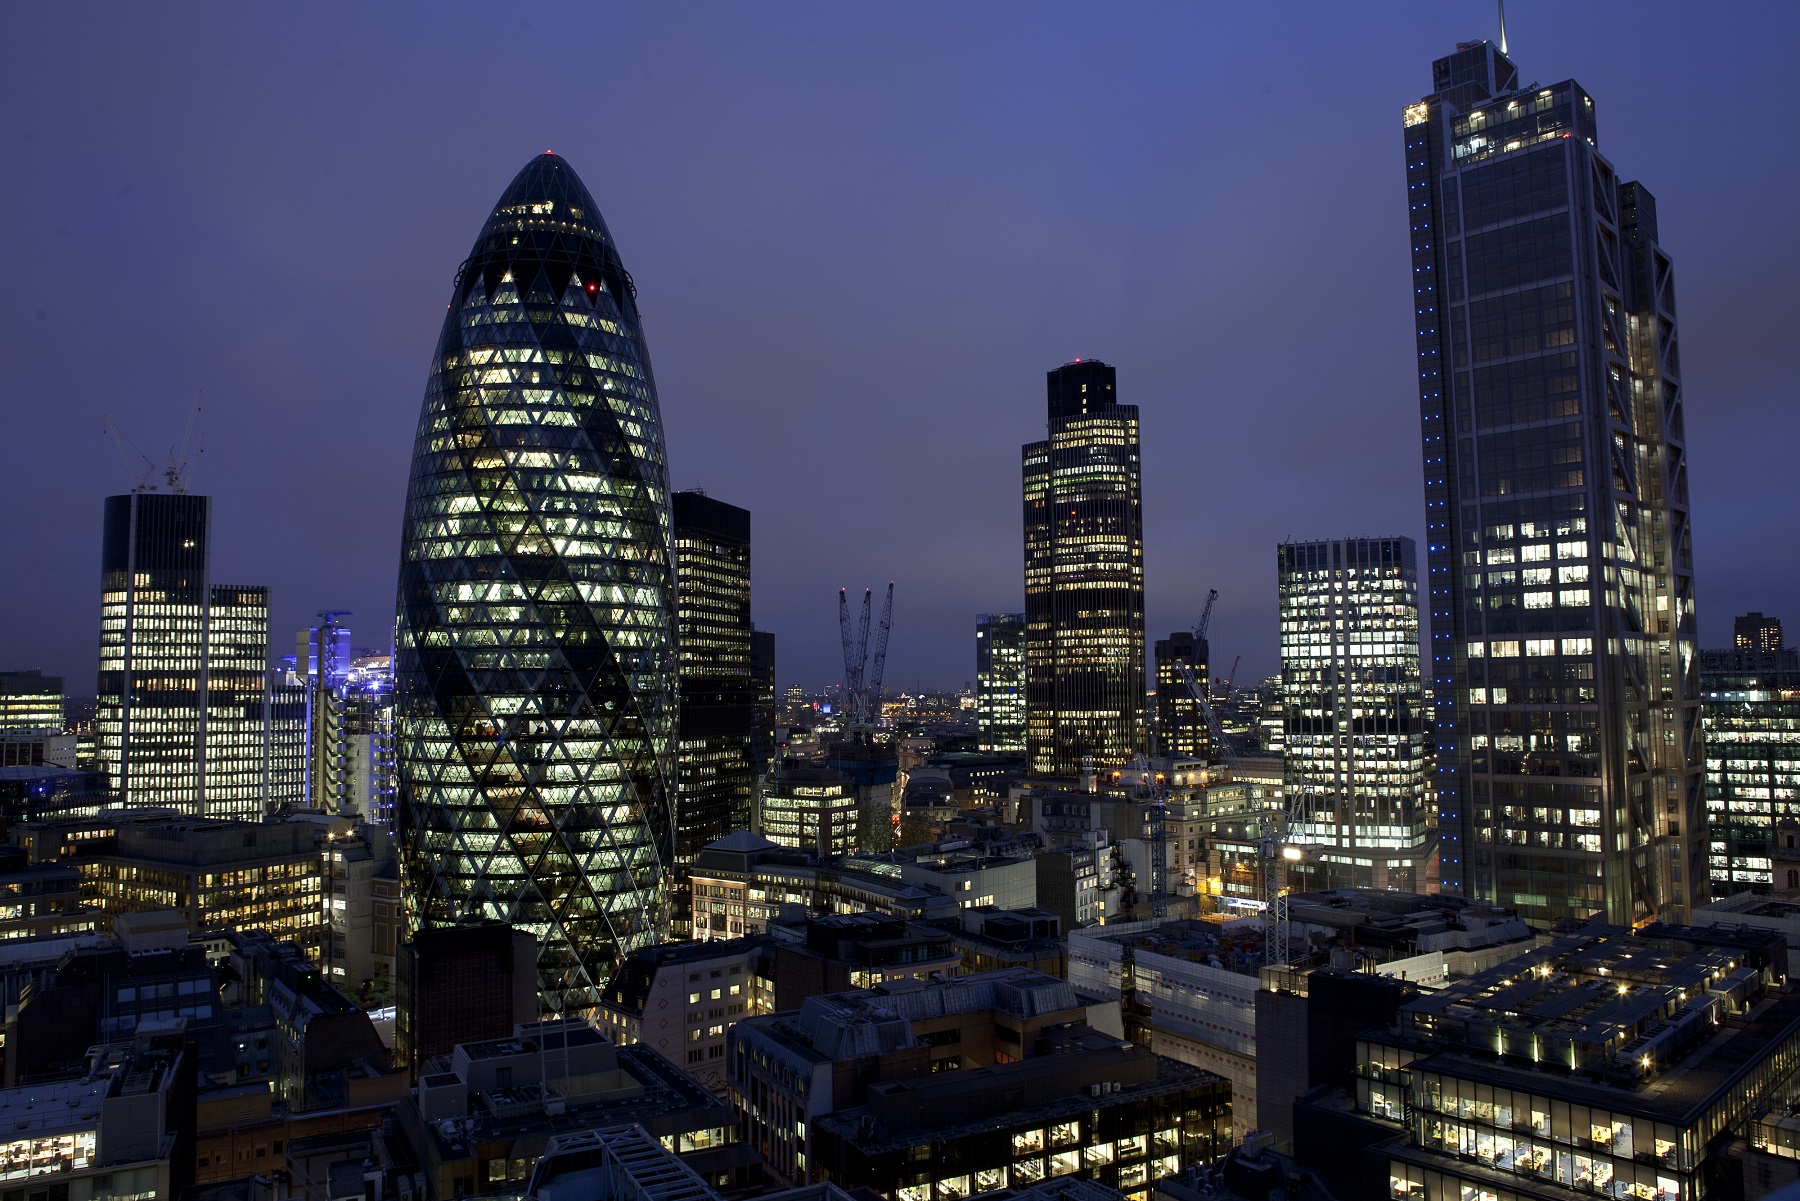 Lighting up the City of London’s next skyscrapers